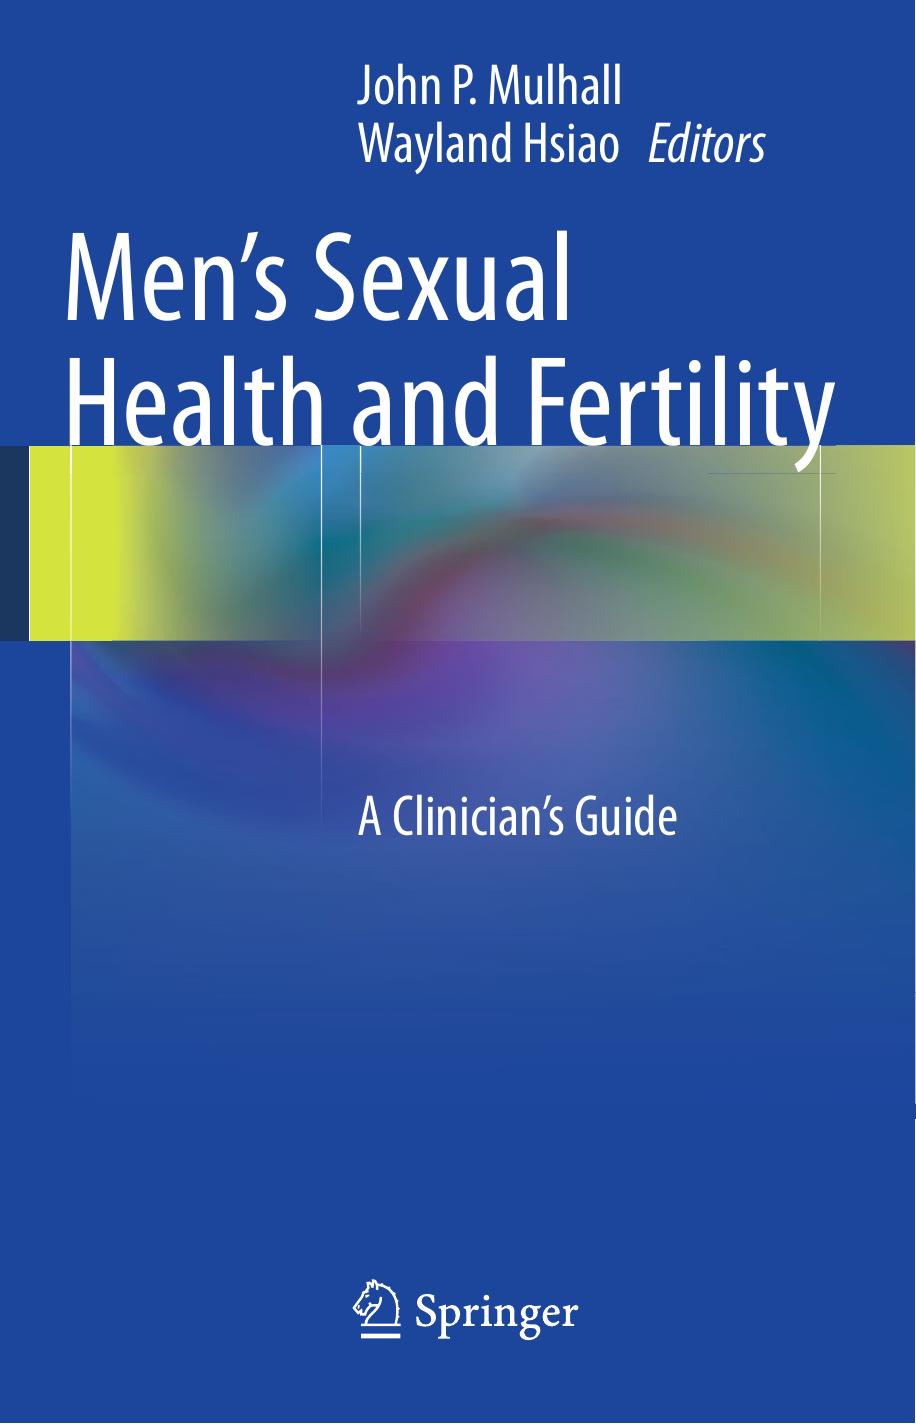 Men's Sexual Health and Fertility A Clinician's Guide 2014